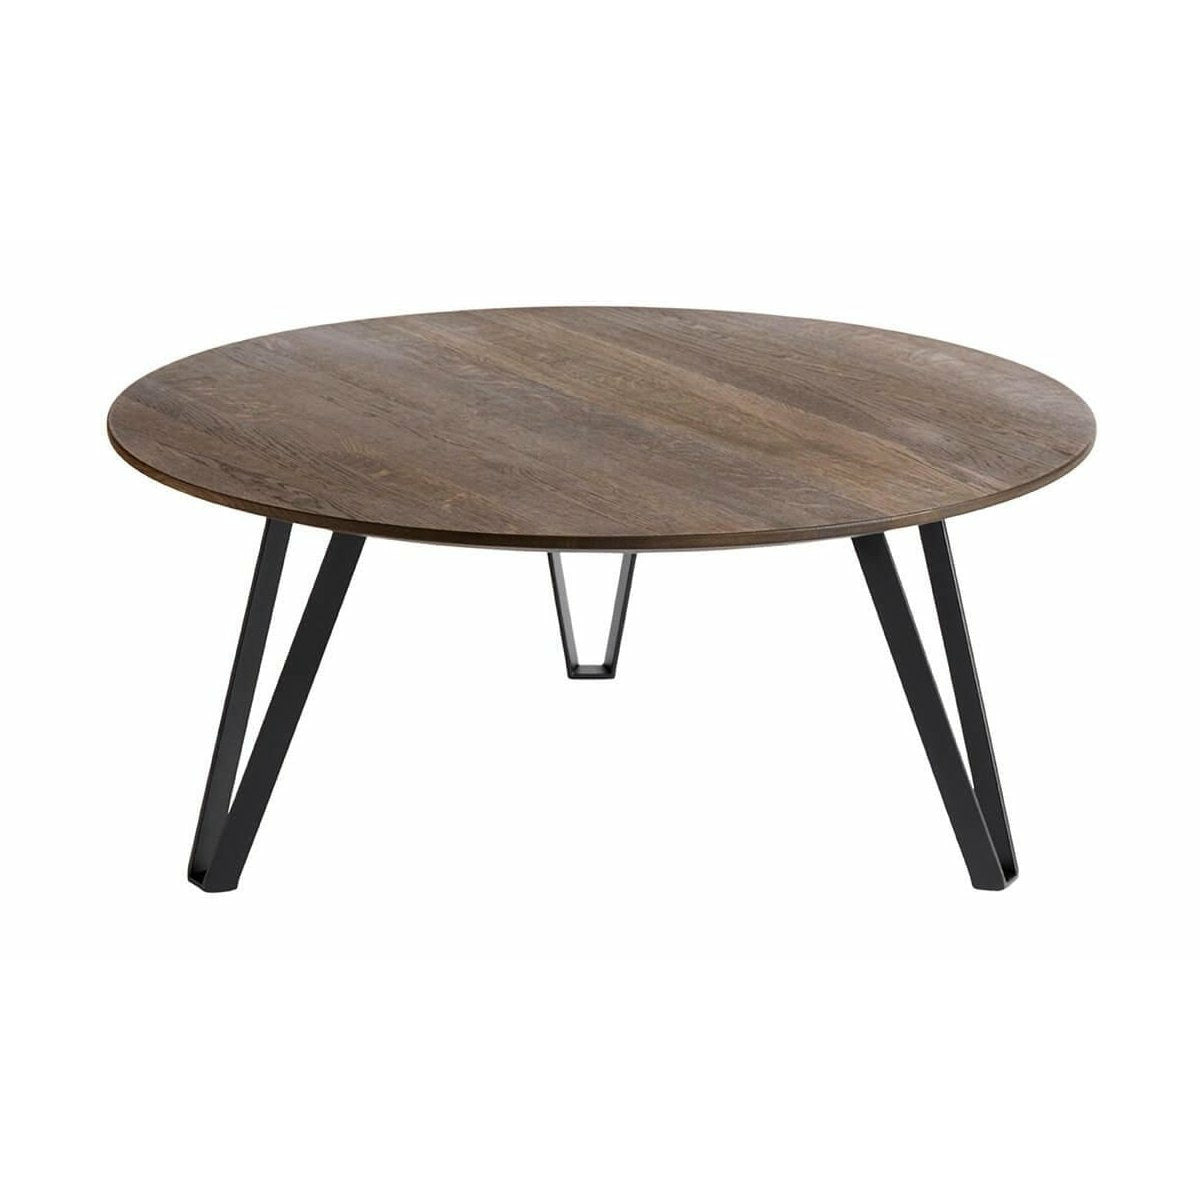 Muubs Table basse Space Fmoked Oak, Ø90cm